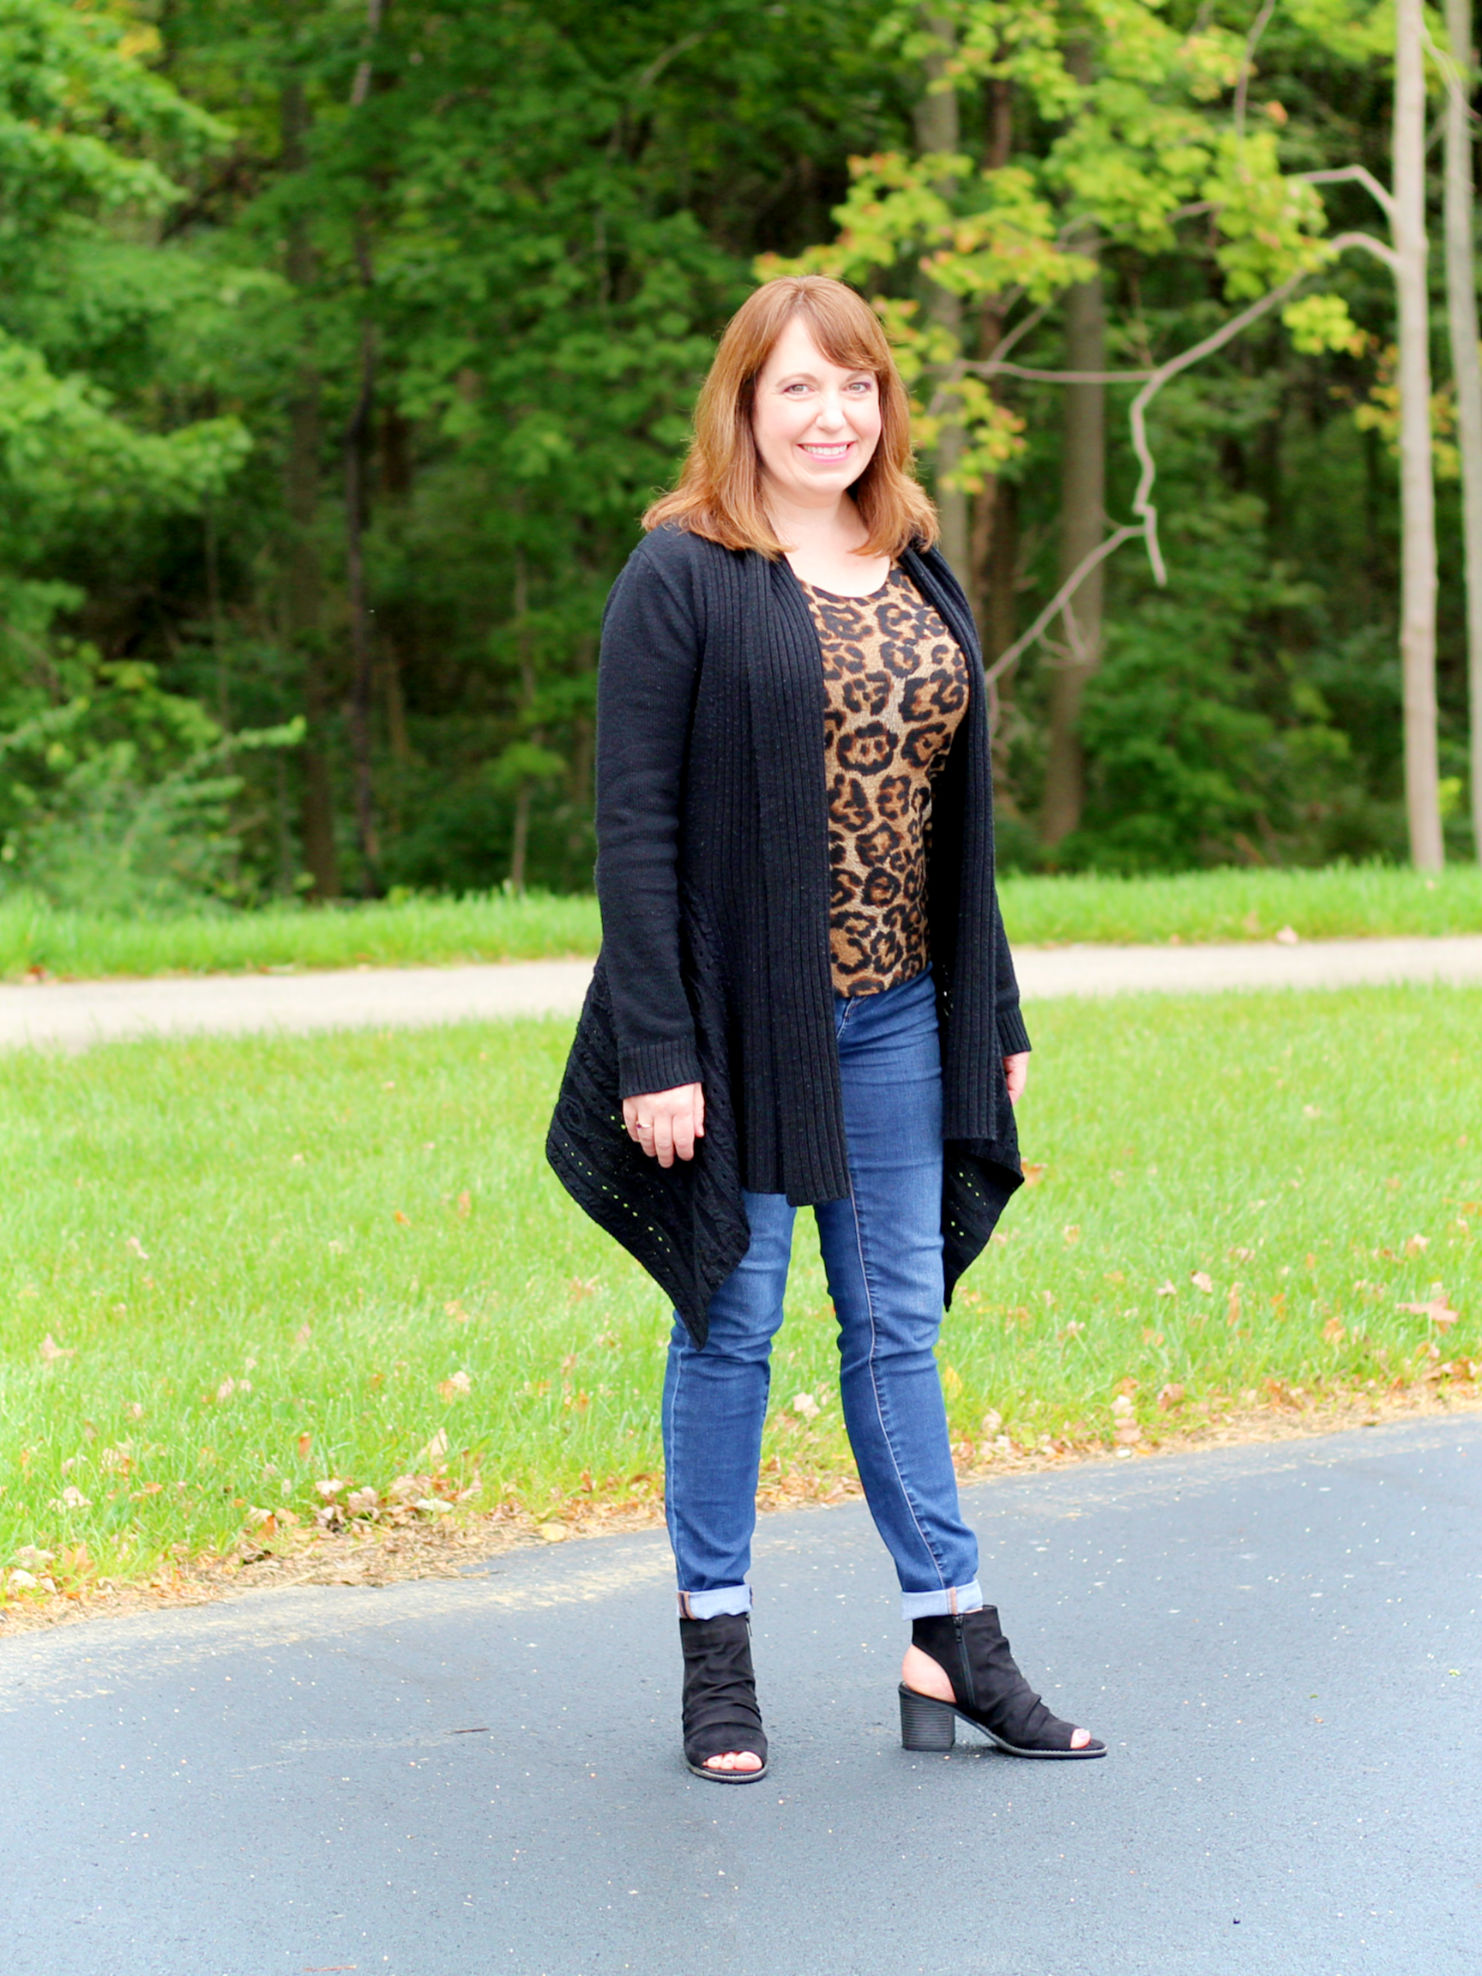 Leopard Print Tank with Black Cardi Dressed in Faith